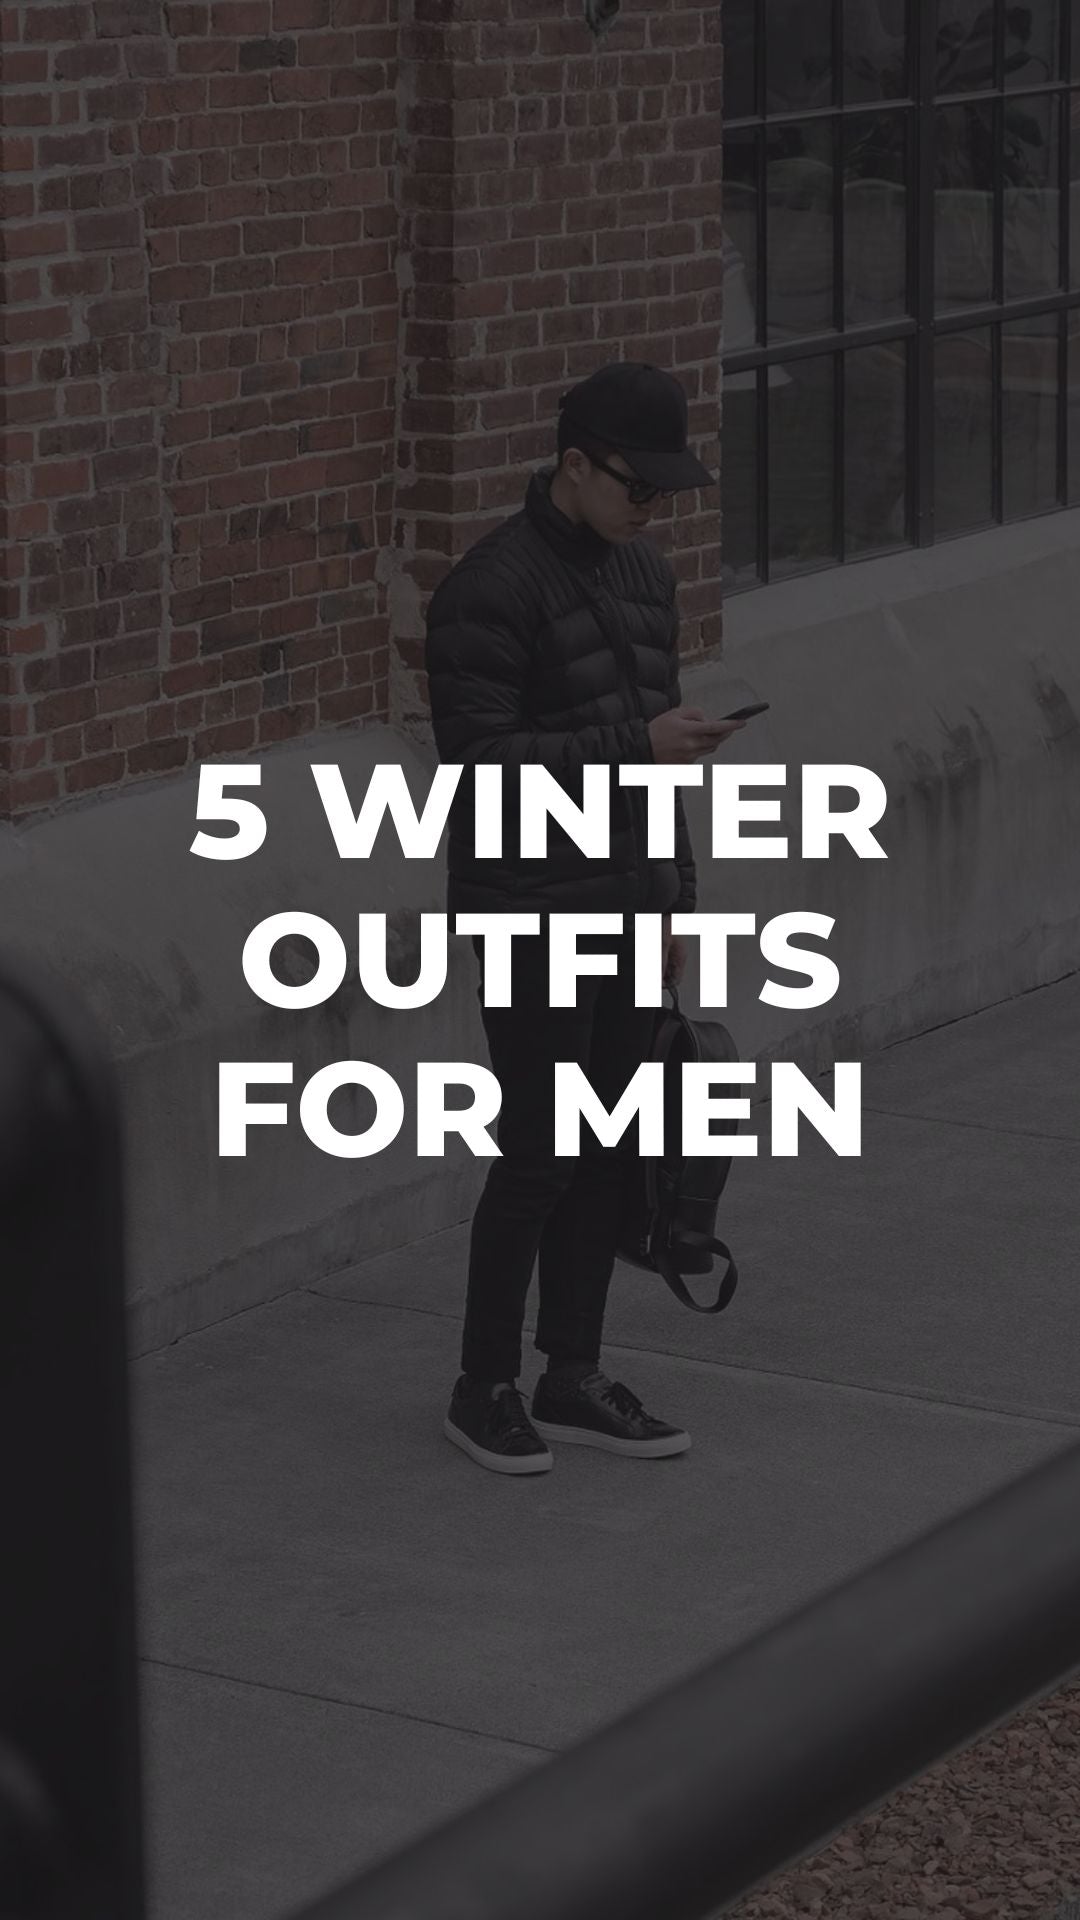 5 Winter Outfits For Minimalists